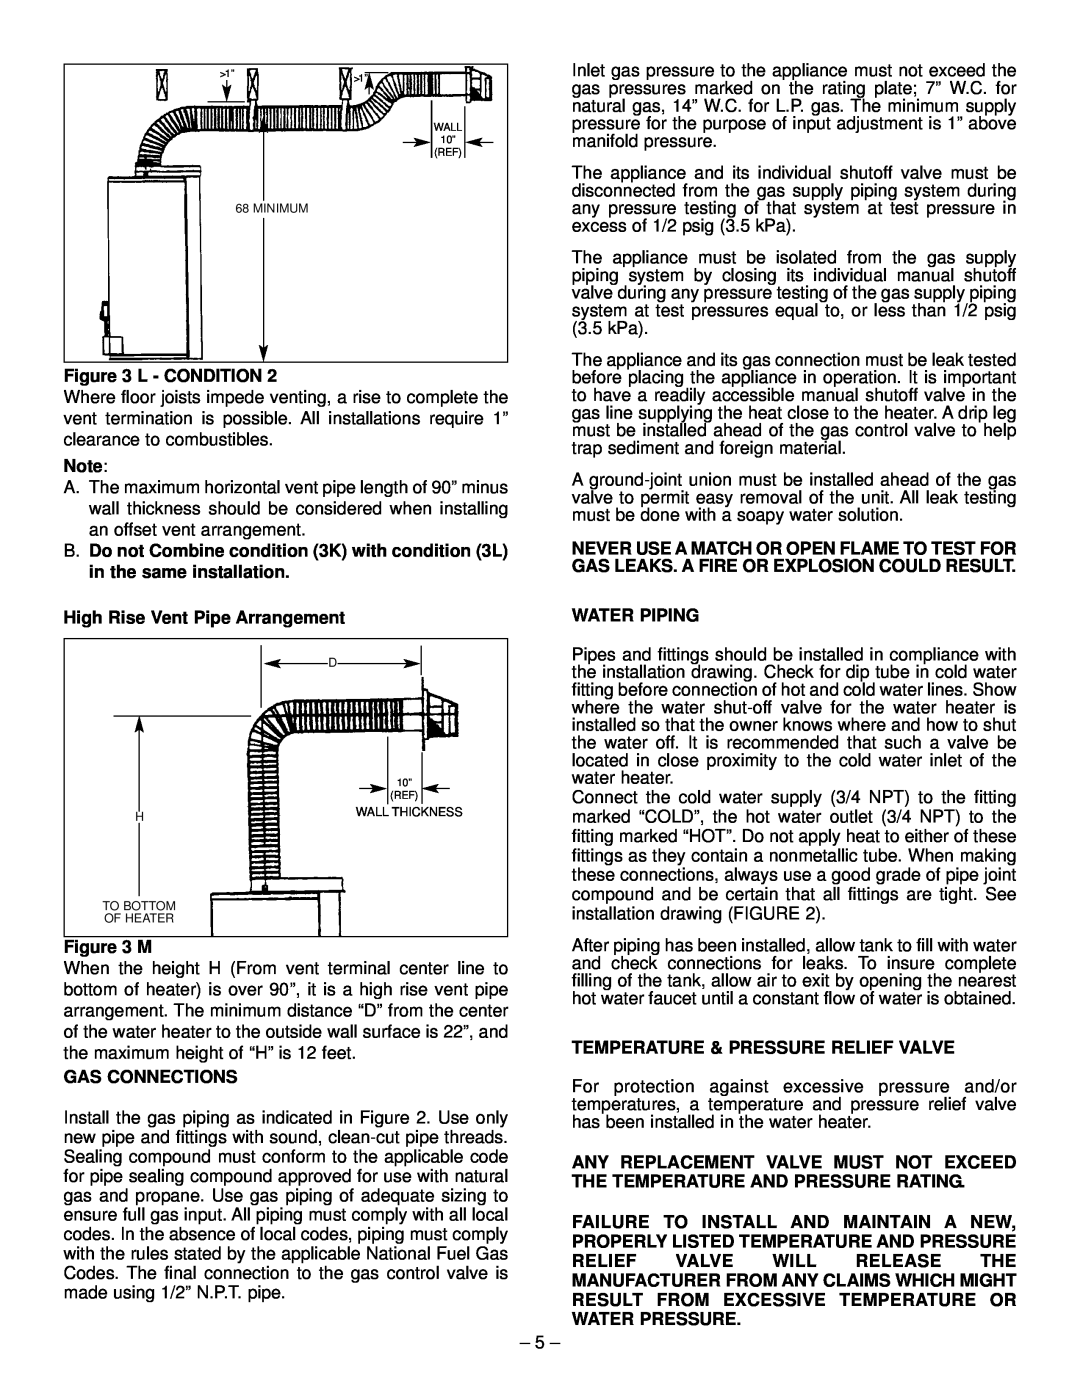 GSW PART NO.70999 REV.G (03-12) L - Condition, High Rise Vent Pipe Arrangement, Water Piping, M, Gas Connections 